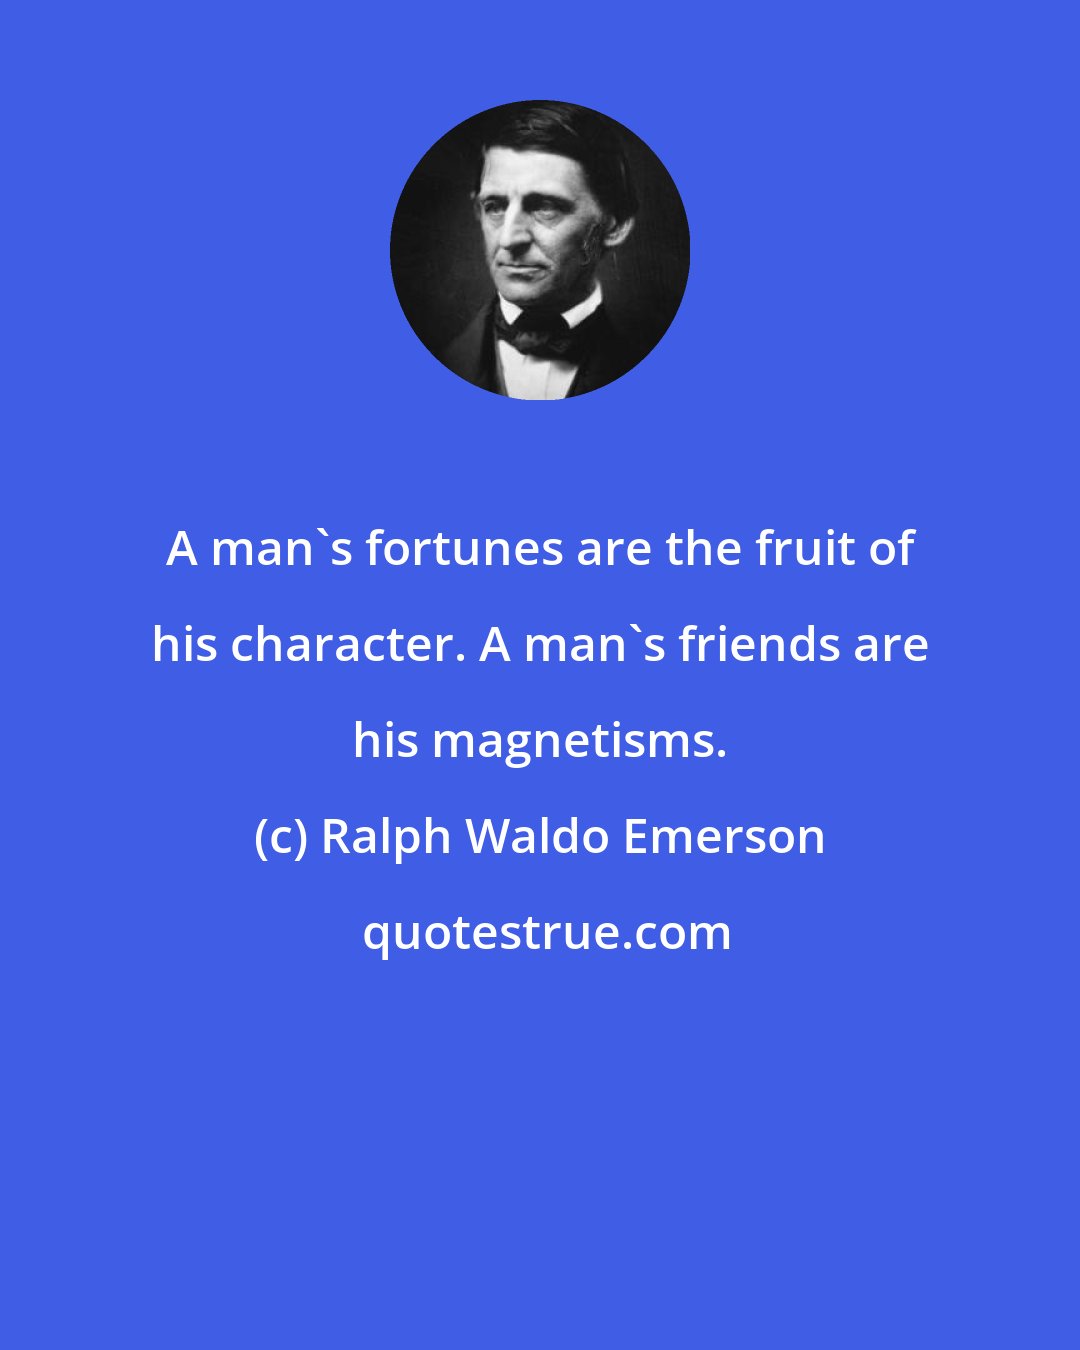 Ralph Waldo Emerson: A man's fortunes are the fruit of his character. A man's friends are his magnetisms.